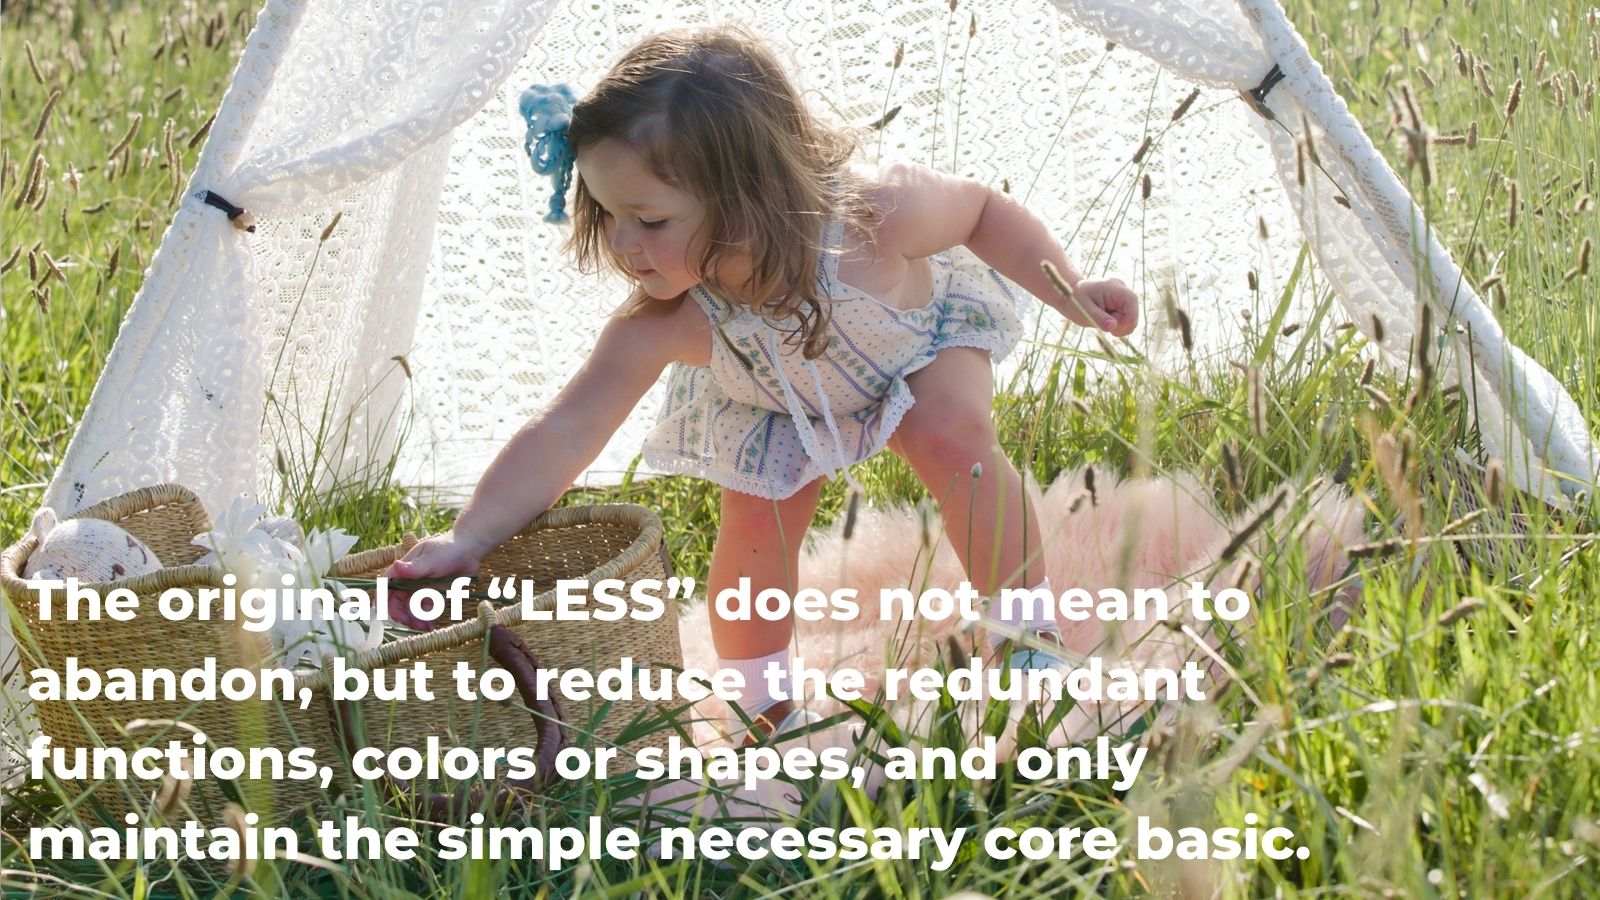 the original of “LESS” does not mean to abandon, but to reduce the redundant functions, colors or shapes, and only maintain the simple necessary core basic. 